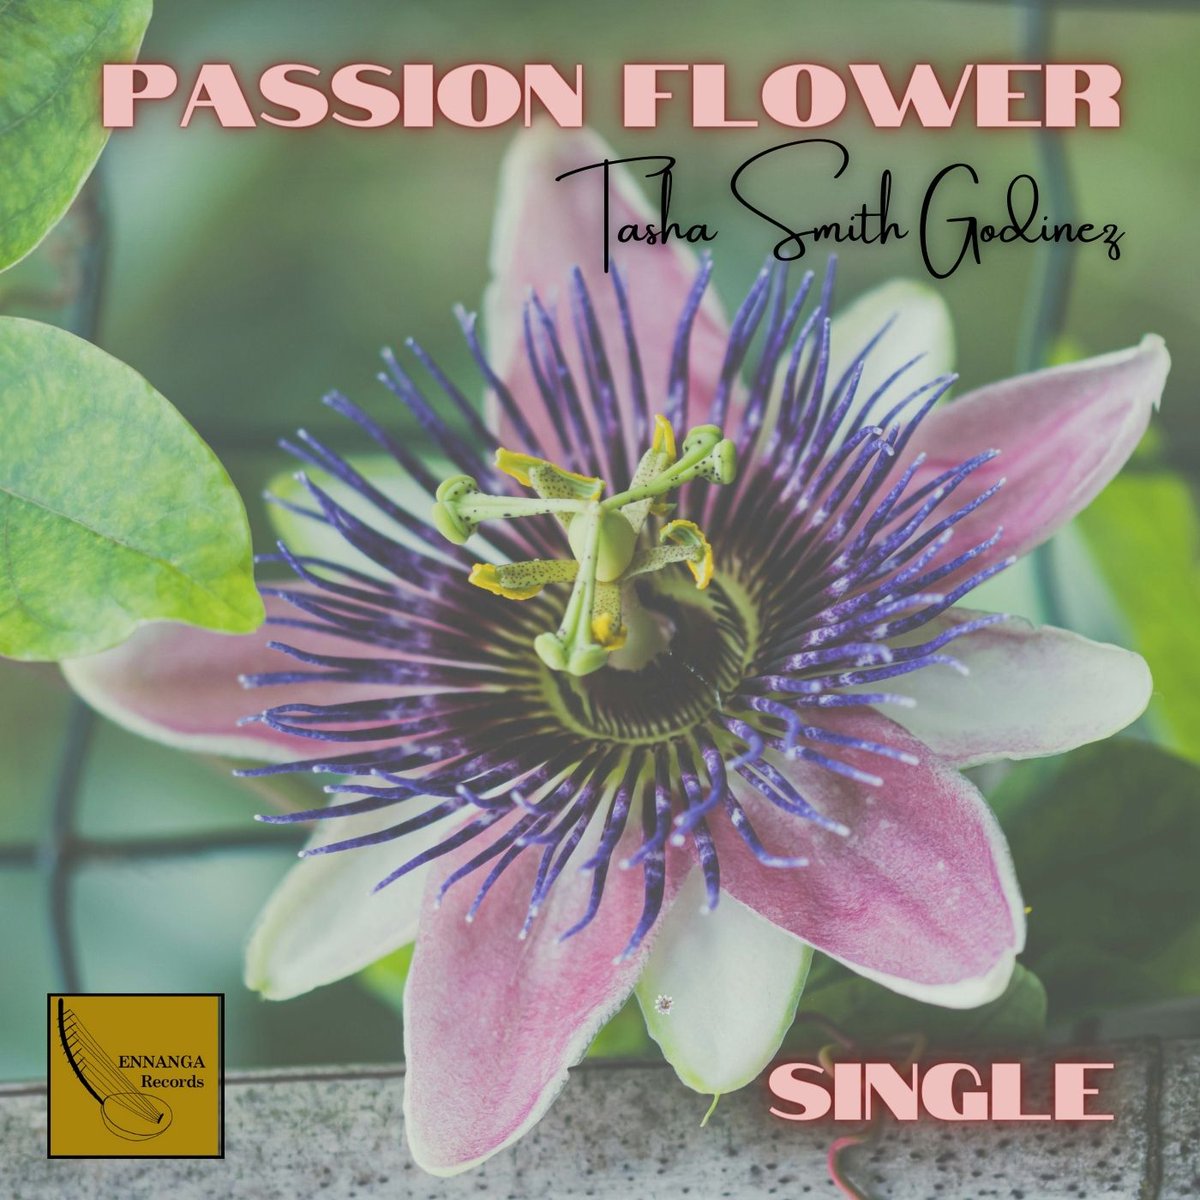 The sweet new single by @HarpbyTashaSG PASSION FLOWER - ahead of new summer 2024 album A NEW DAY - this track is full of harp magic - world, jazz, avant garde and releases on 24 May through #ennangarecords.... #harpmusic #SanDiego #worldmusic #passionflower